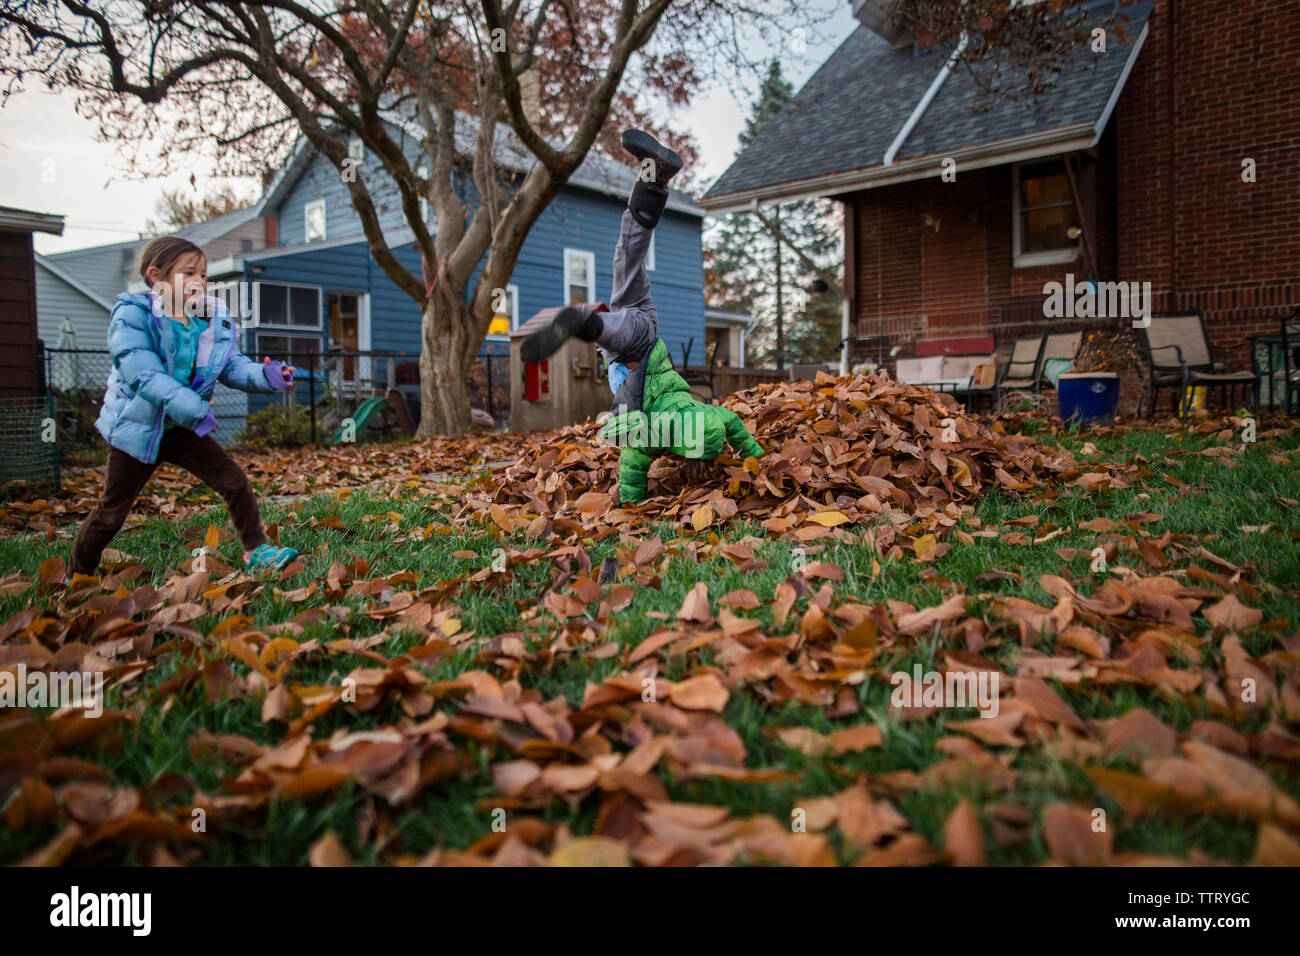 A boy cartwheels into a leaf pile while his happy sister runs around Stock Photo